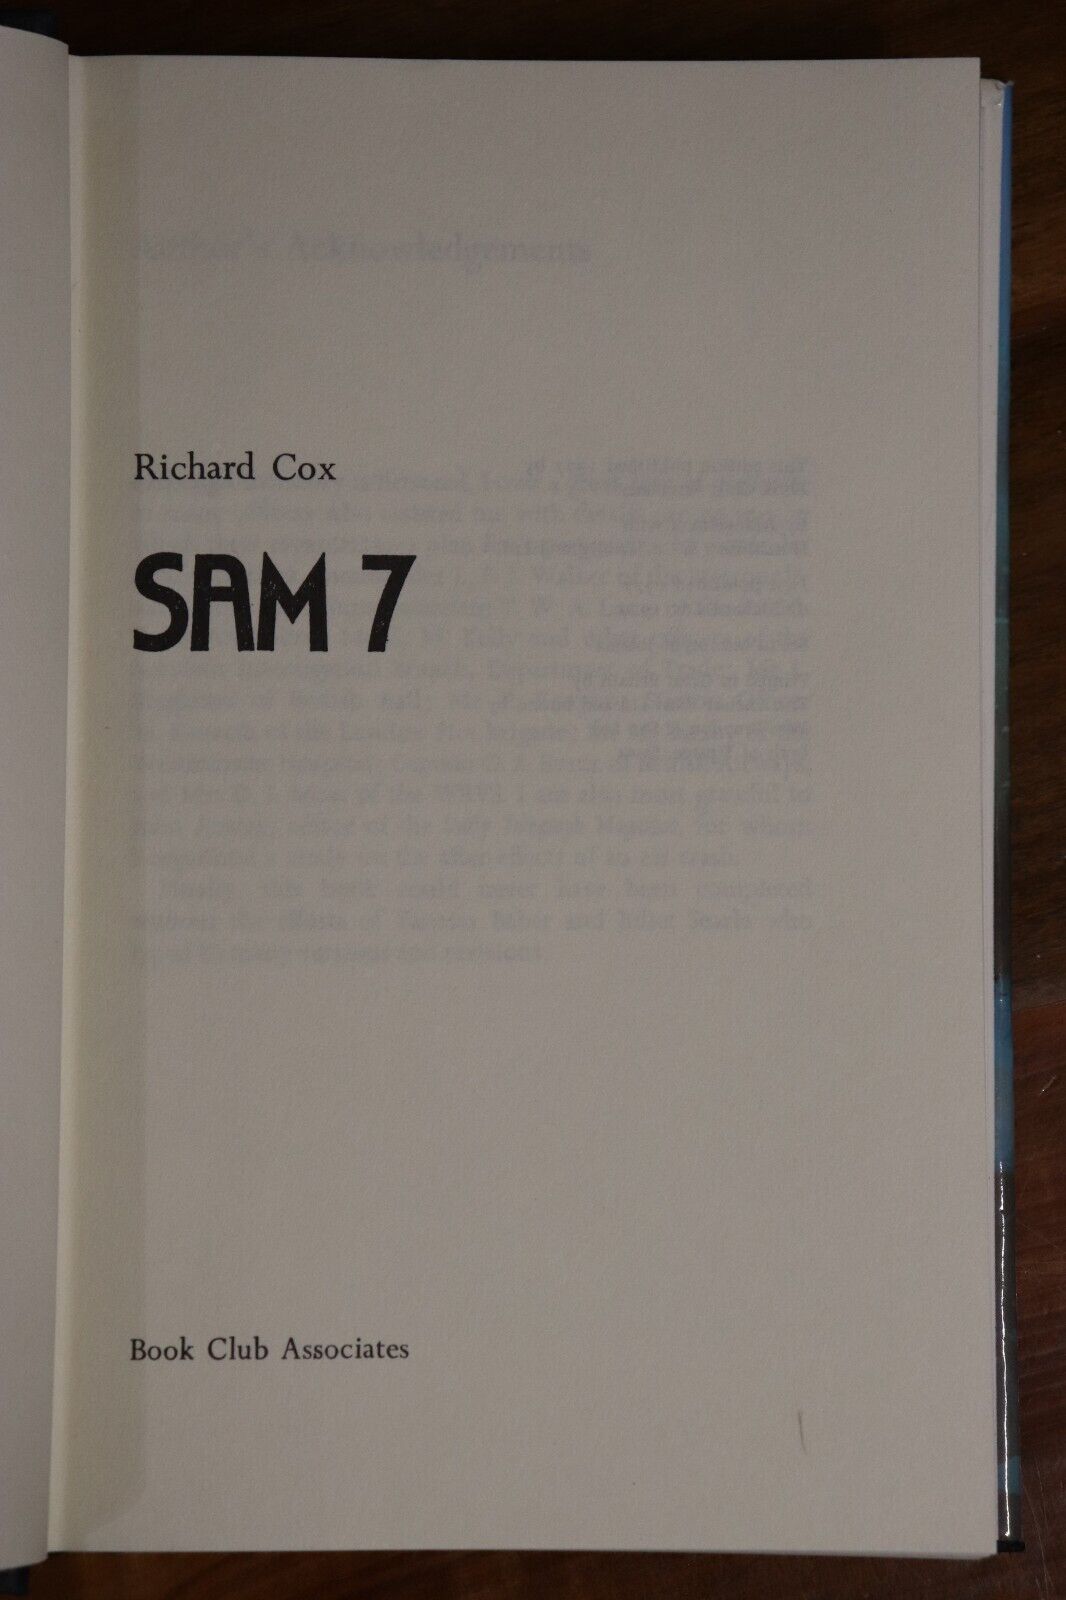 Sam 7 by Richard Cox - 1977 - Vintage Airline Disaster Fiction Book - 0